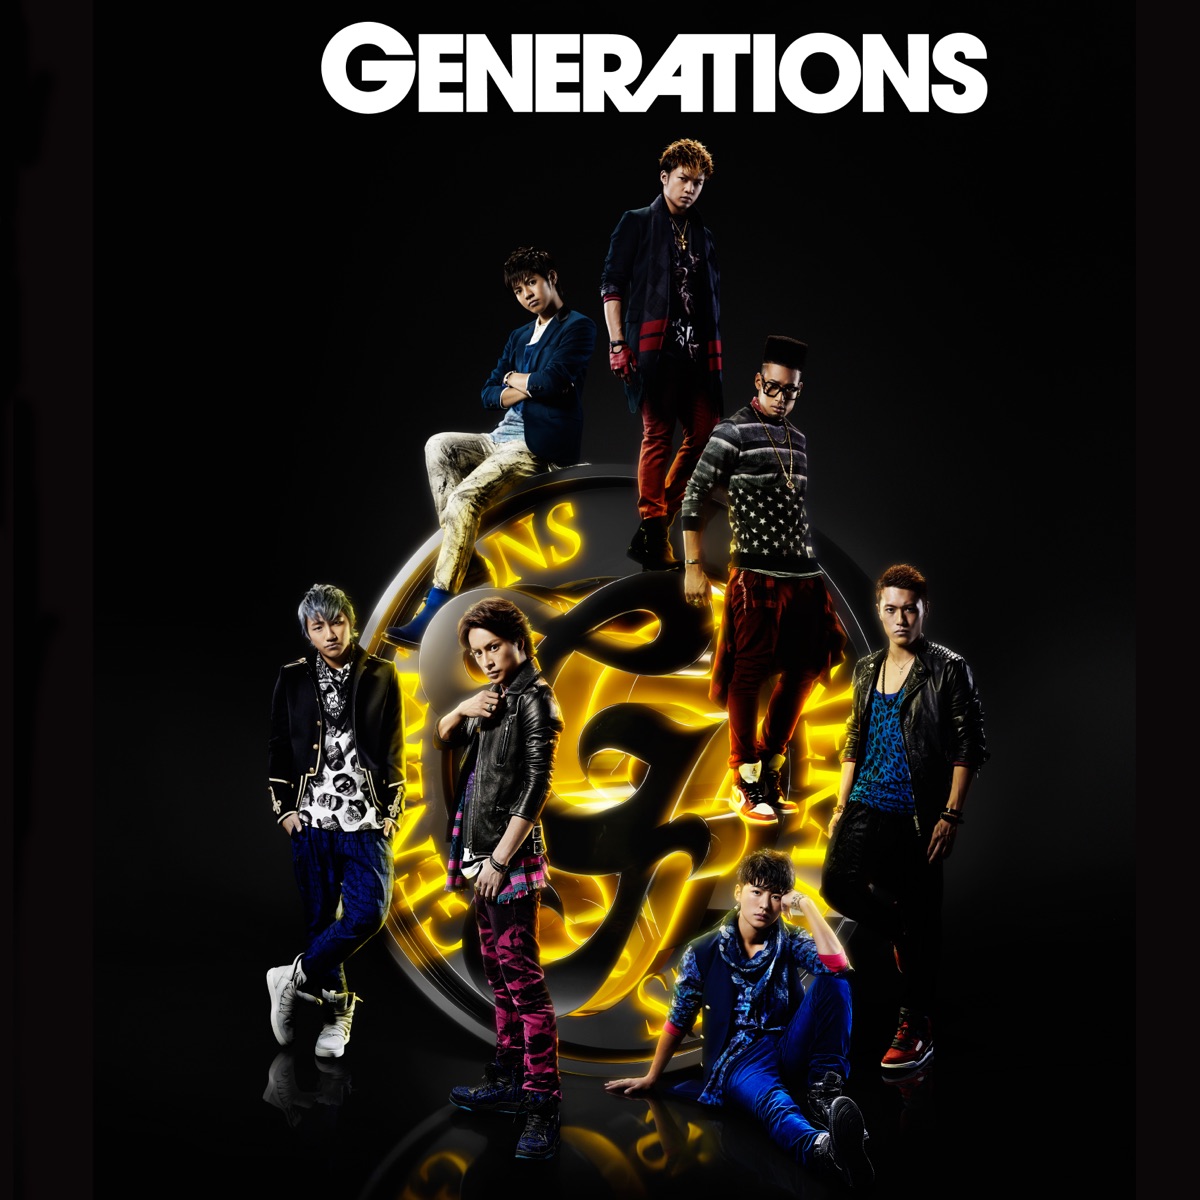 Generations - Album by GENERATIONS from EXILE TRIBE - Apple Music